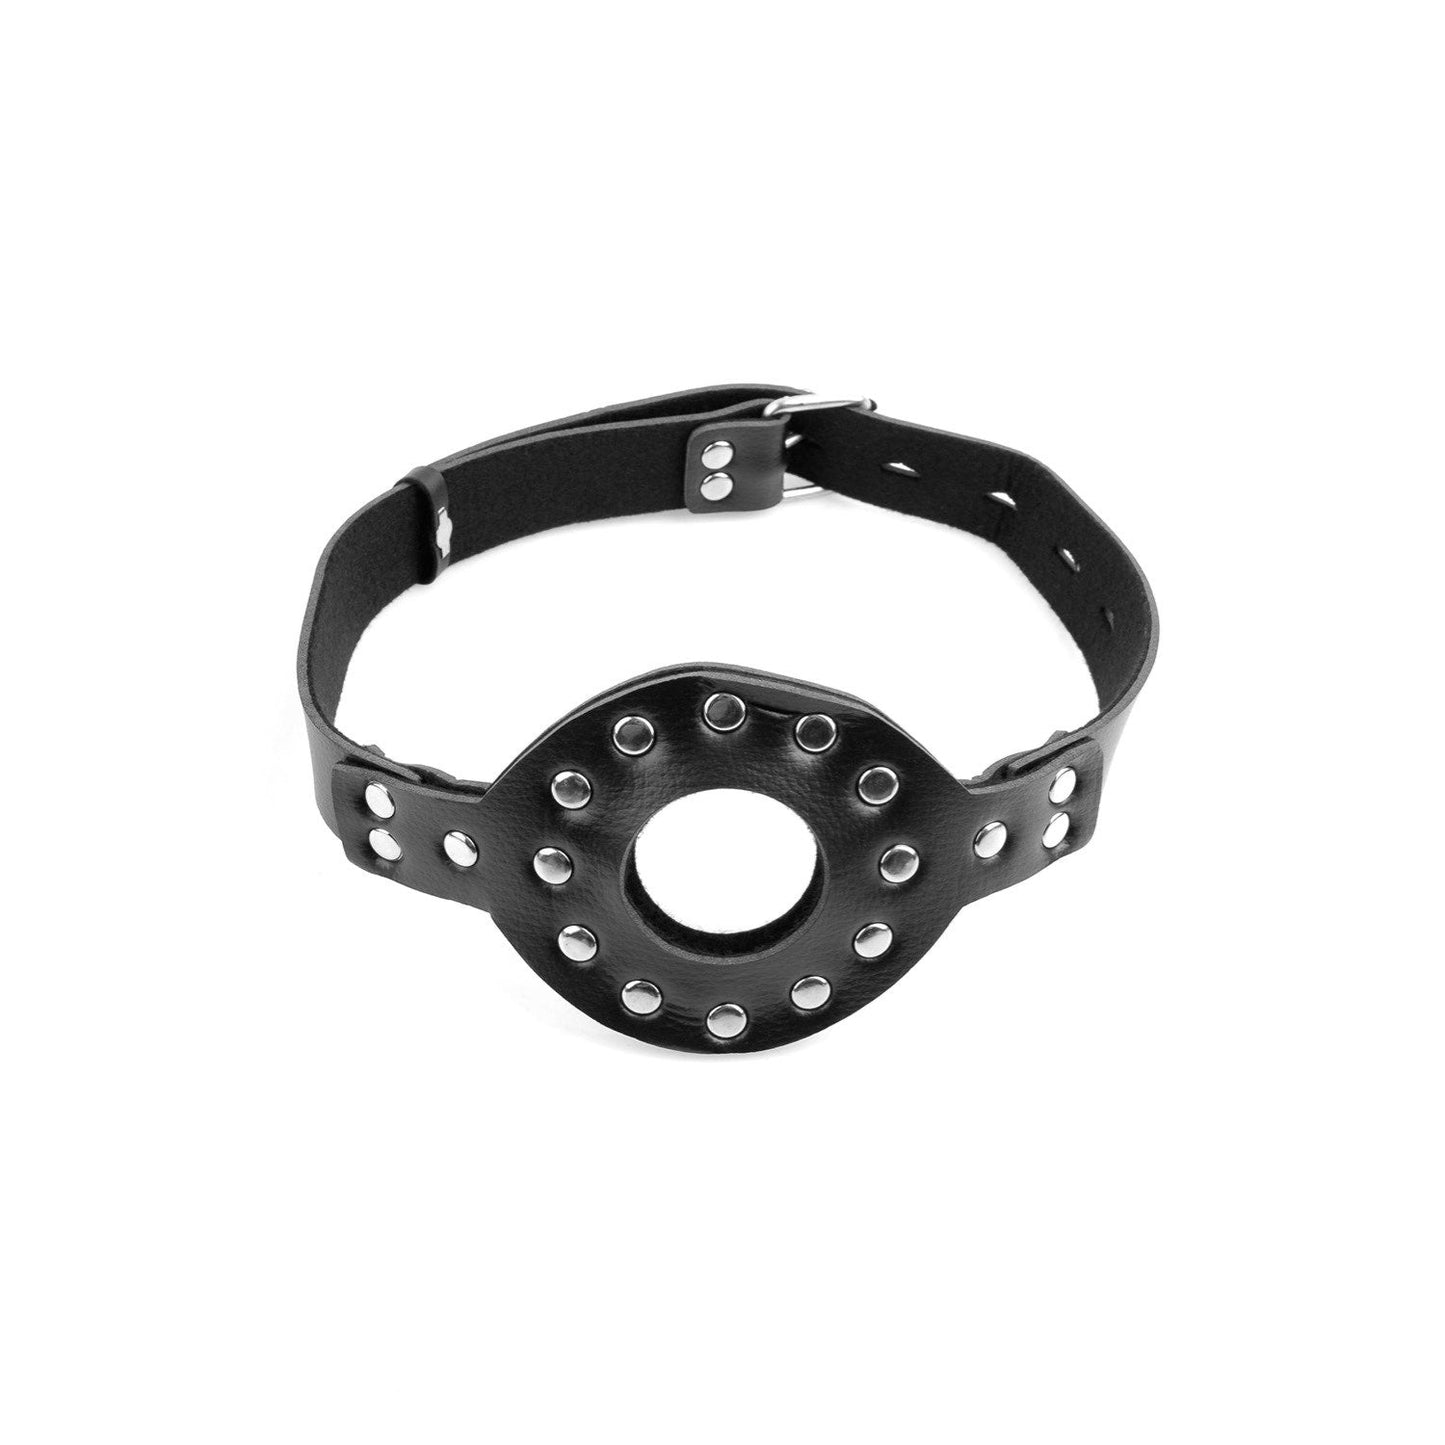 Deluxe Ball Gag with Dong - Black Mouth Restraint with Dong Attachment